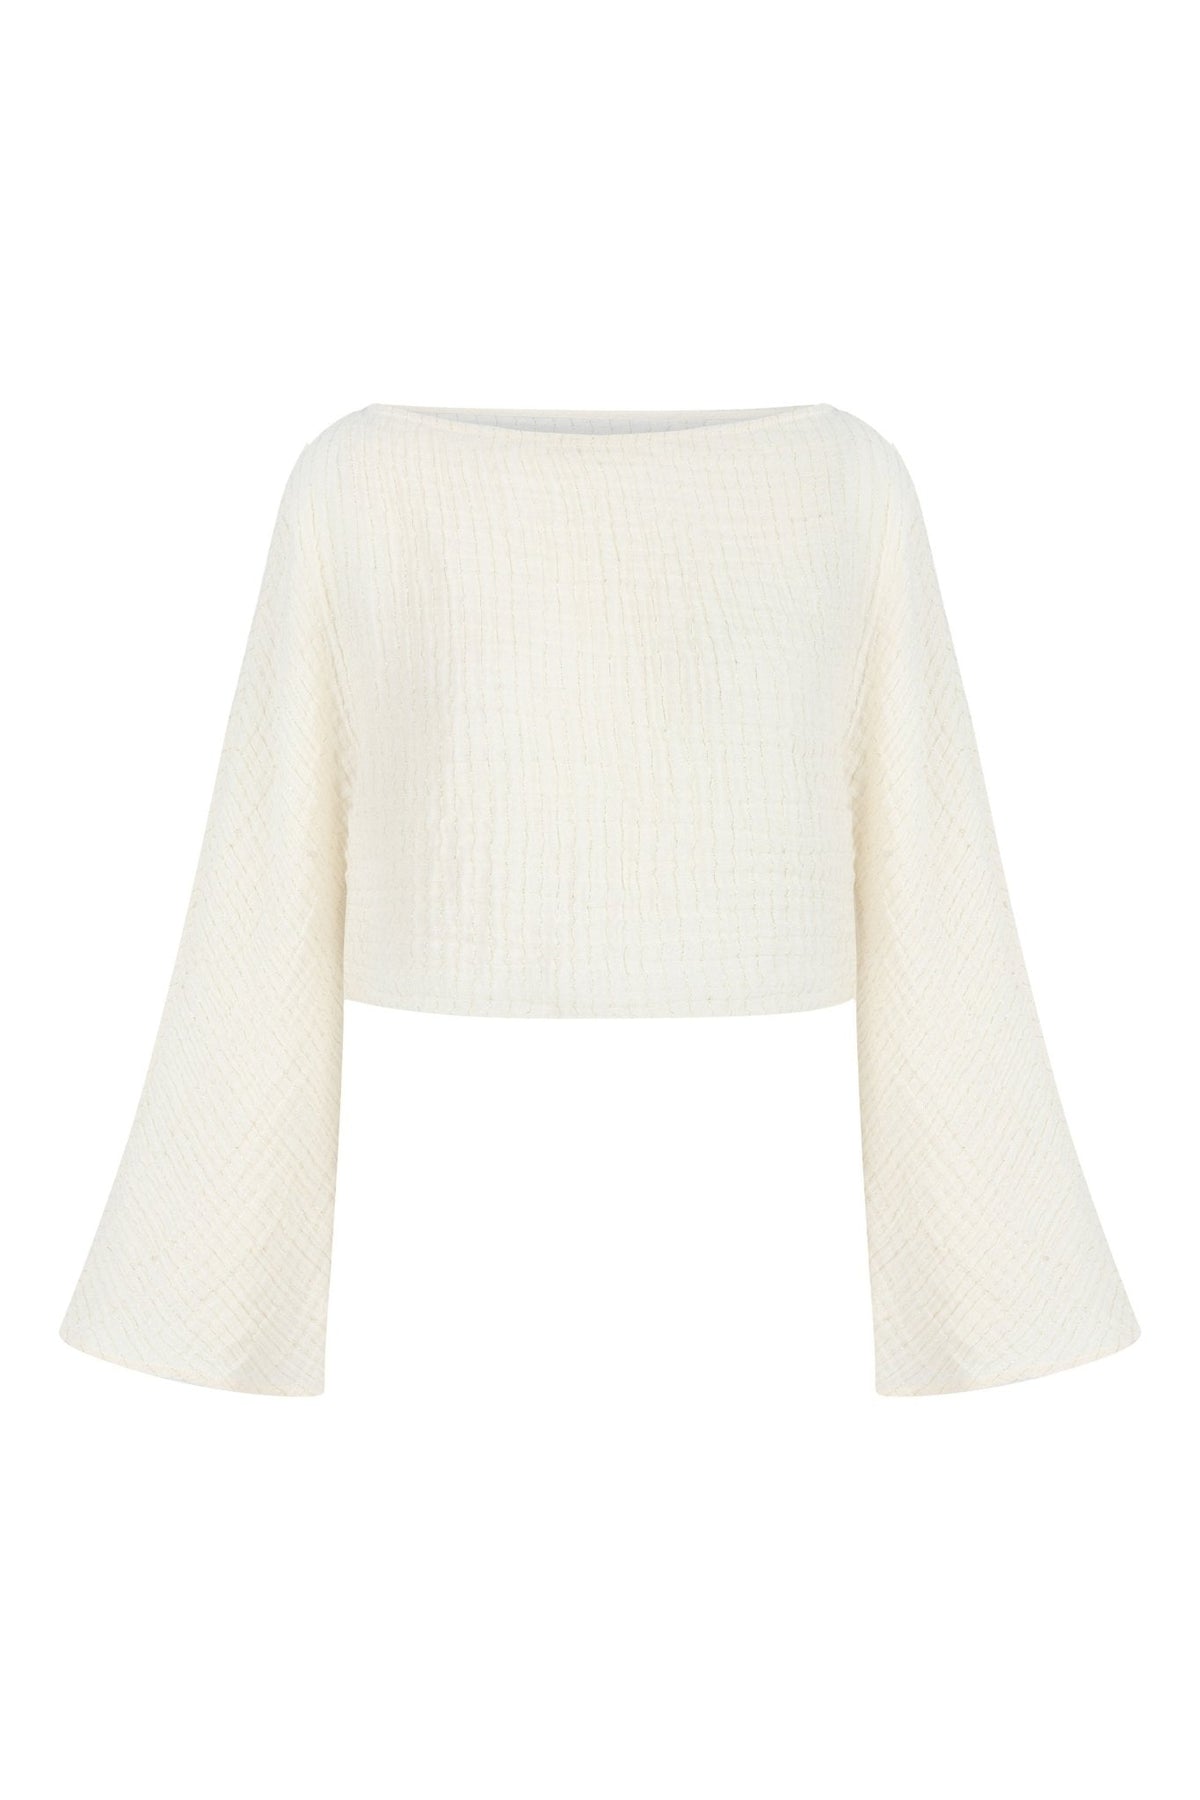 THE HAND LOOM Echo Crop Top - Natural With Gold Stripes